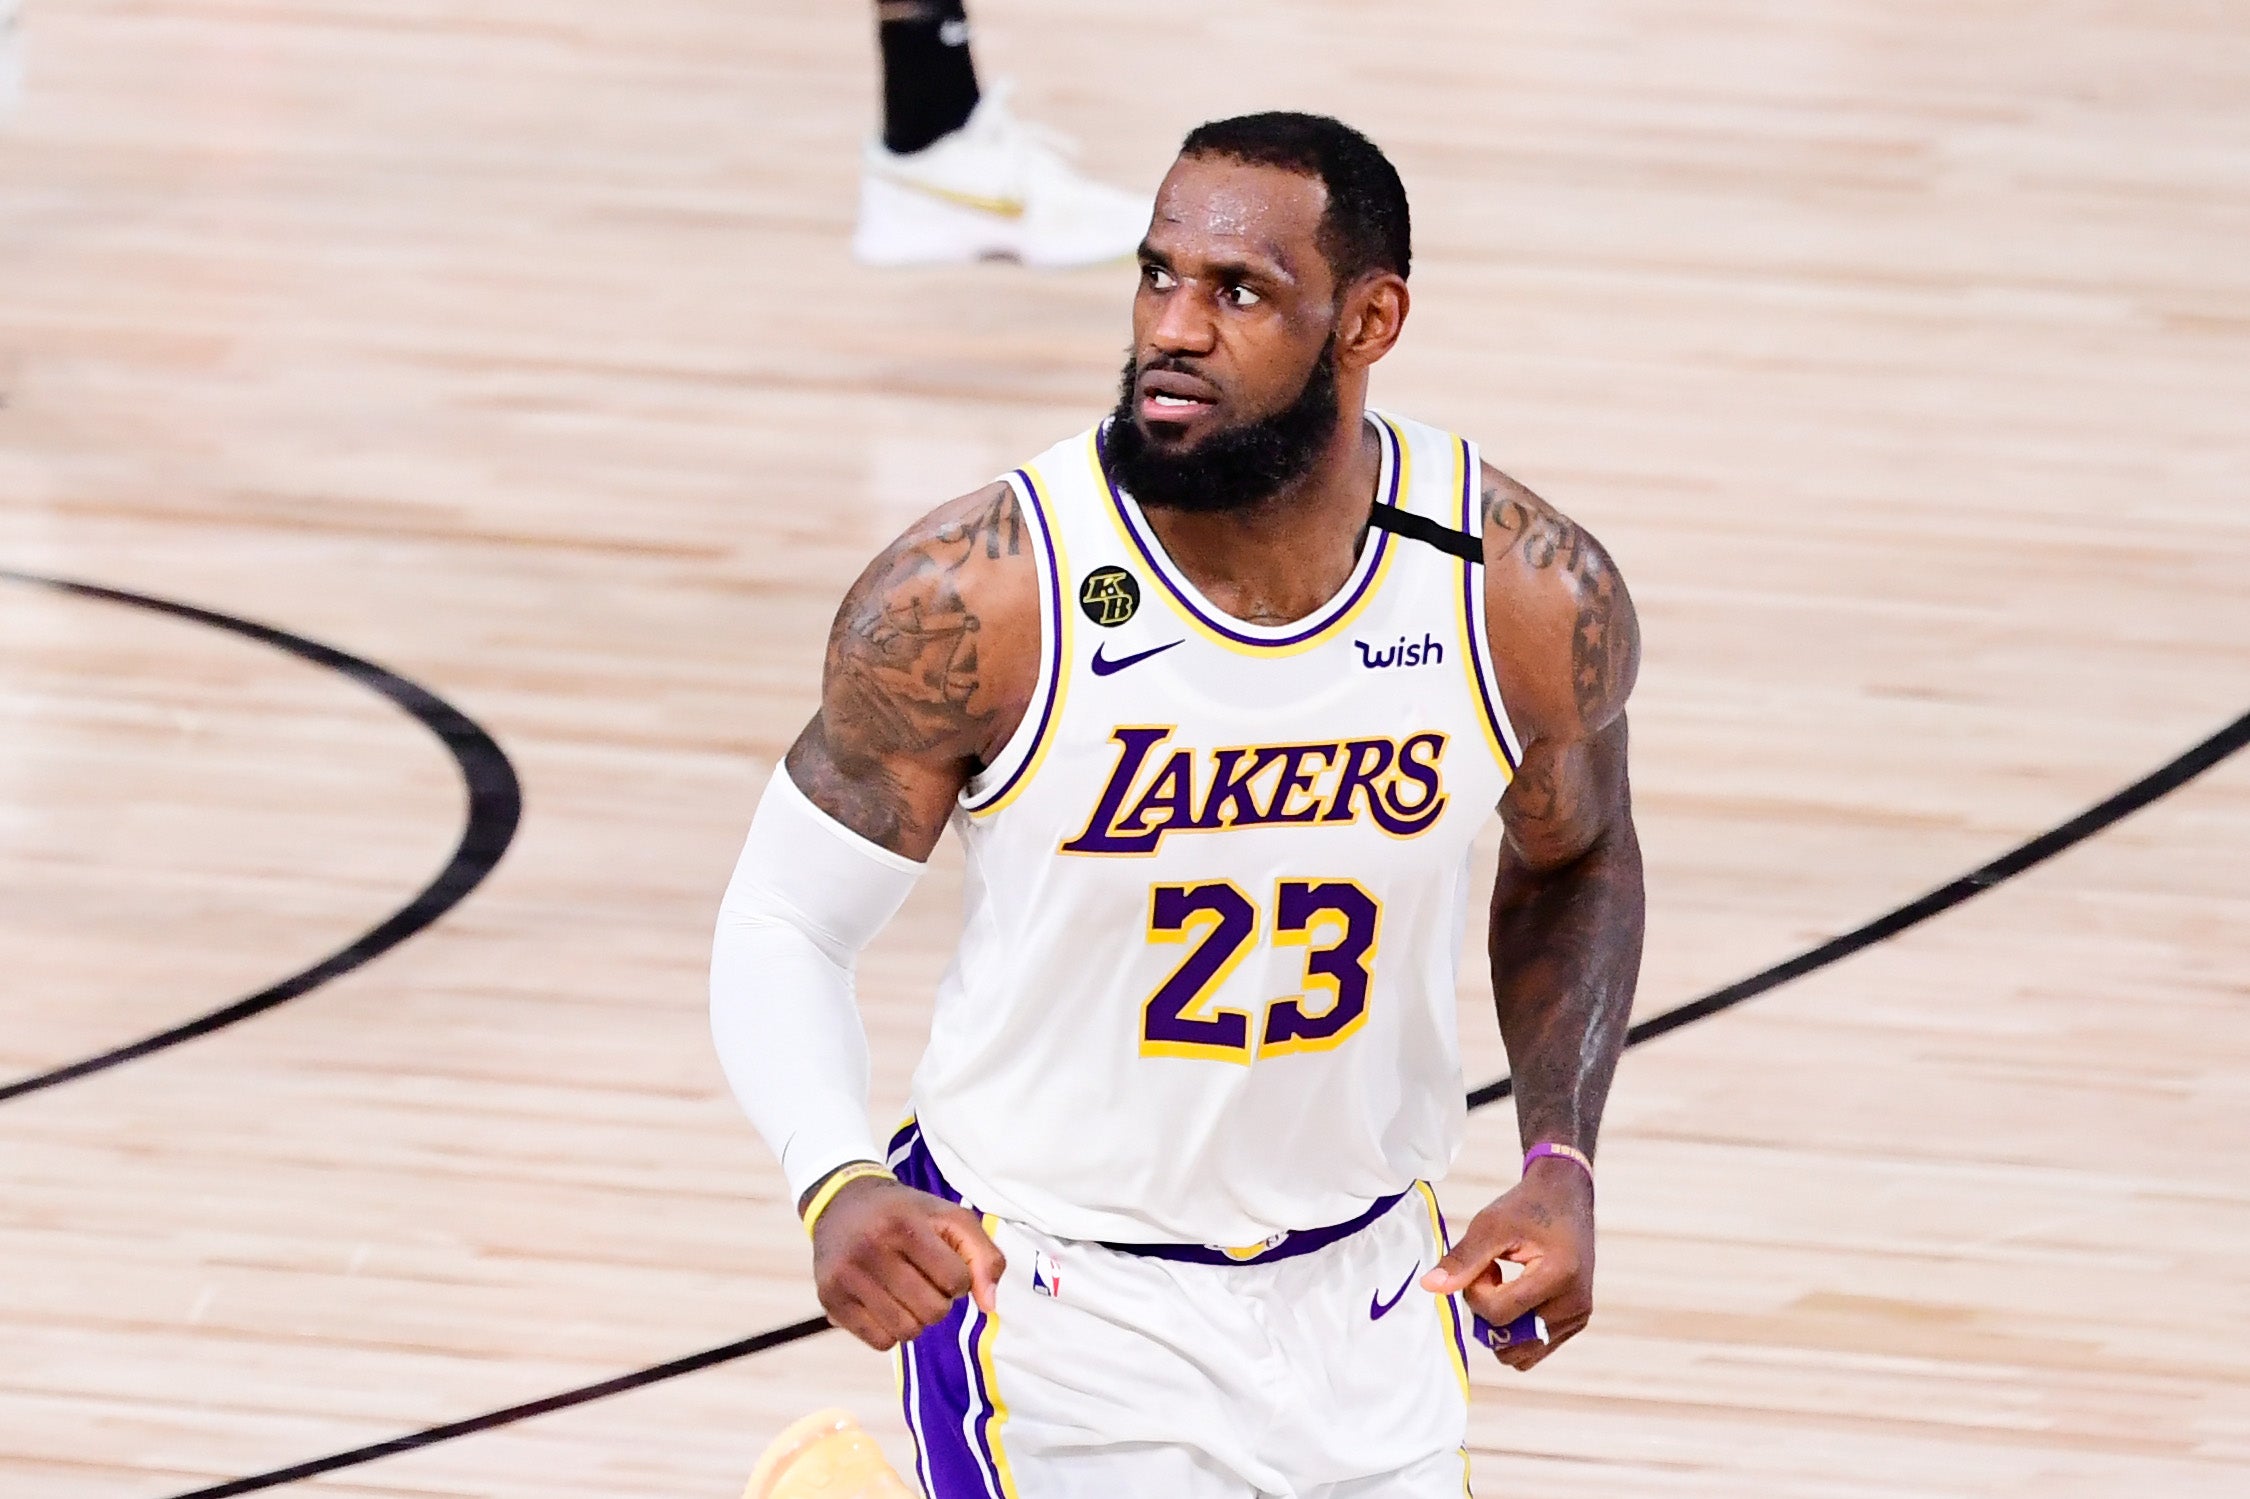 NBA play-off conference semi-finals 2021 Who is playing today and how can I watch? The Independent